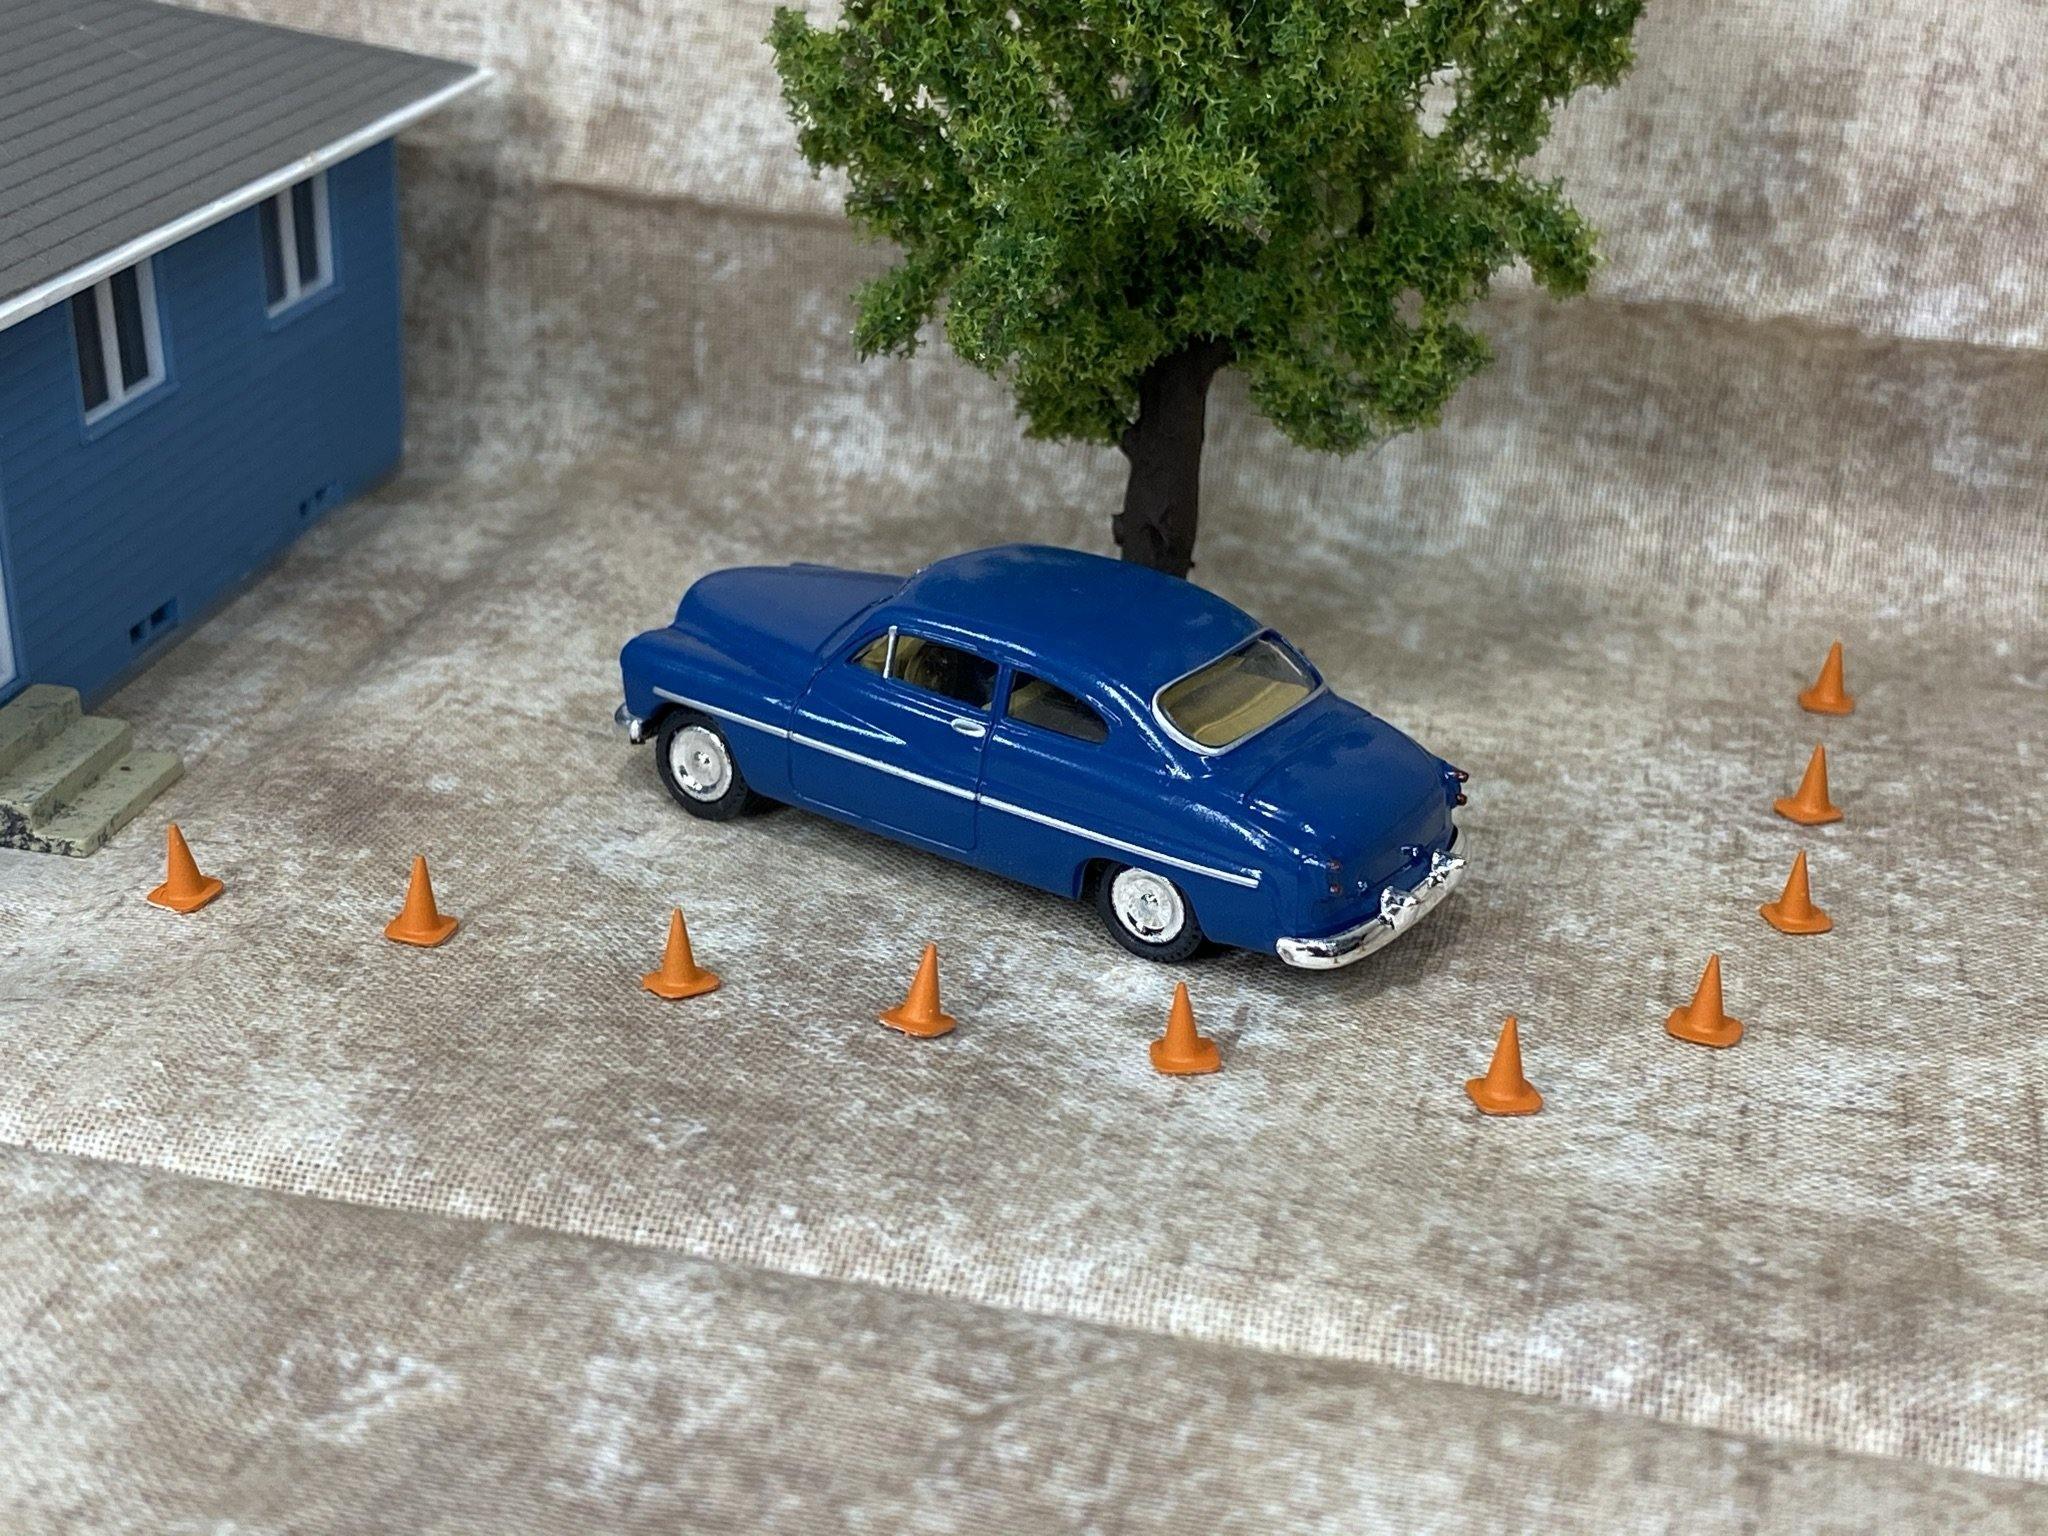 Squeaky's Trains | 18″ Traffic/Construction Cones | HO Scale